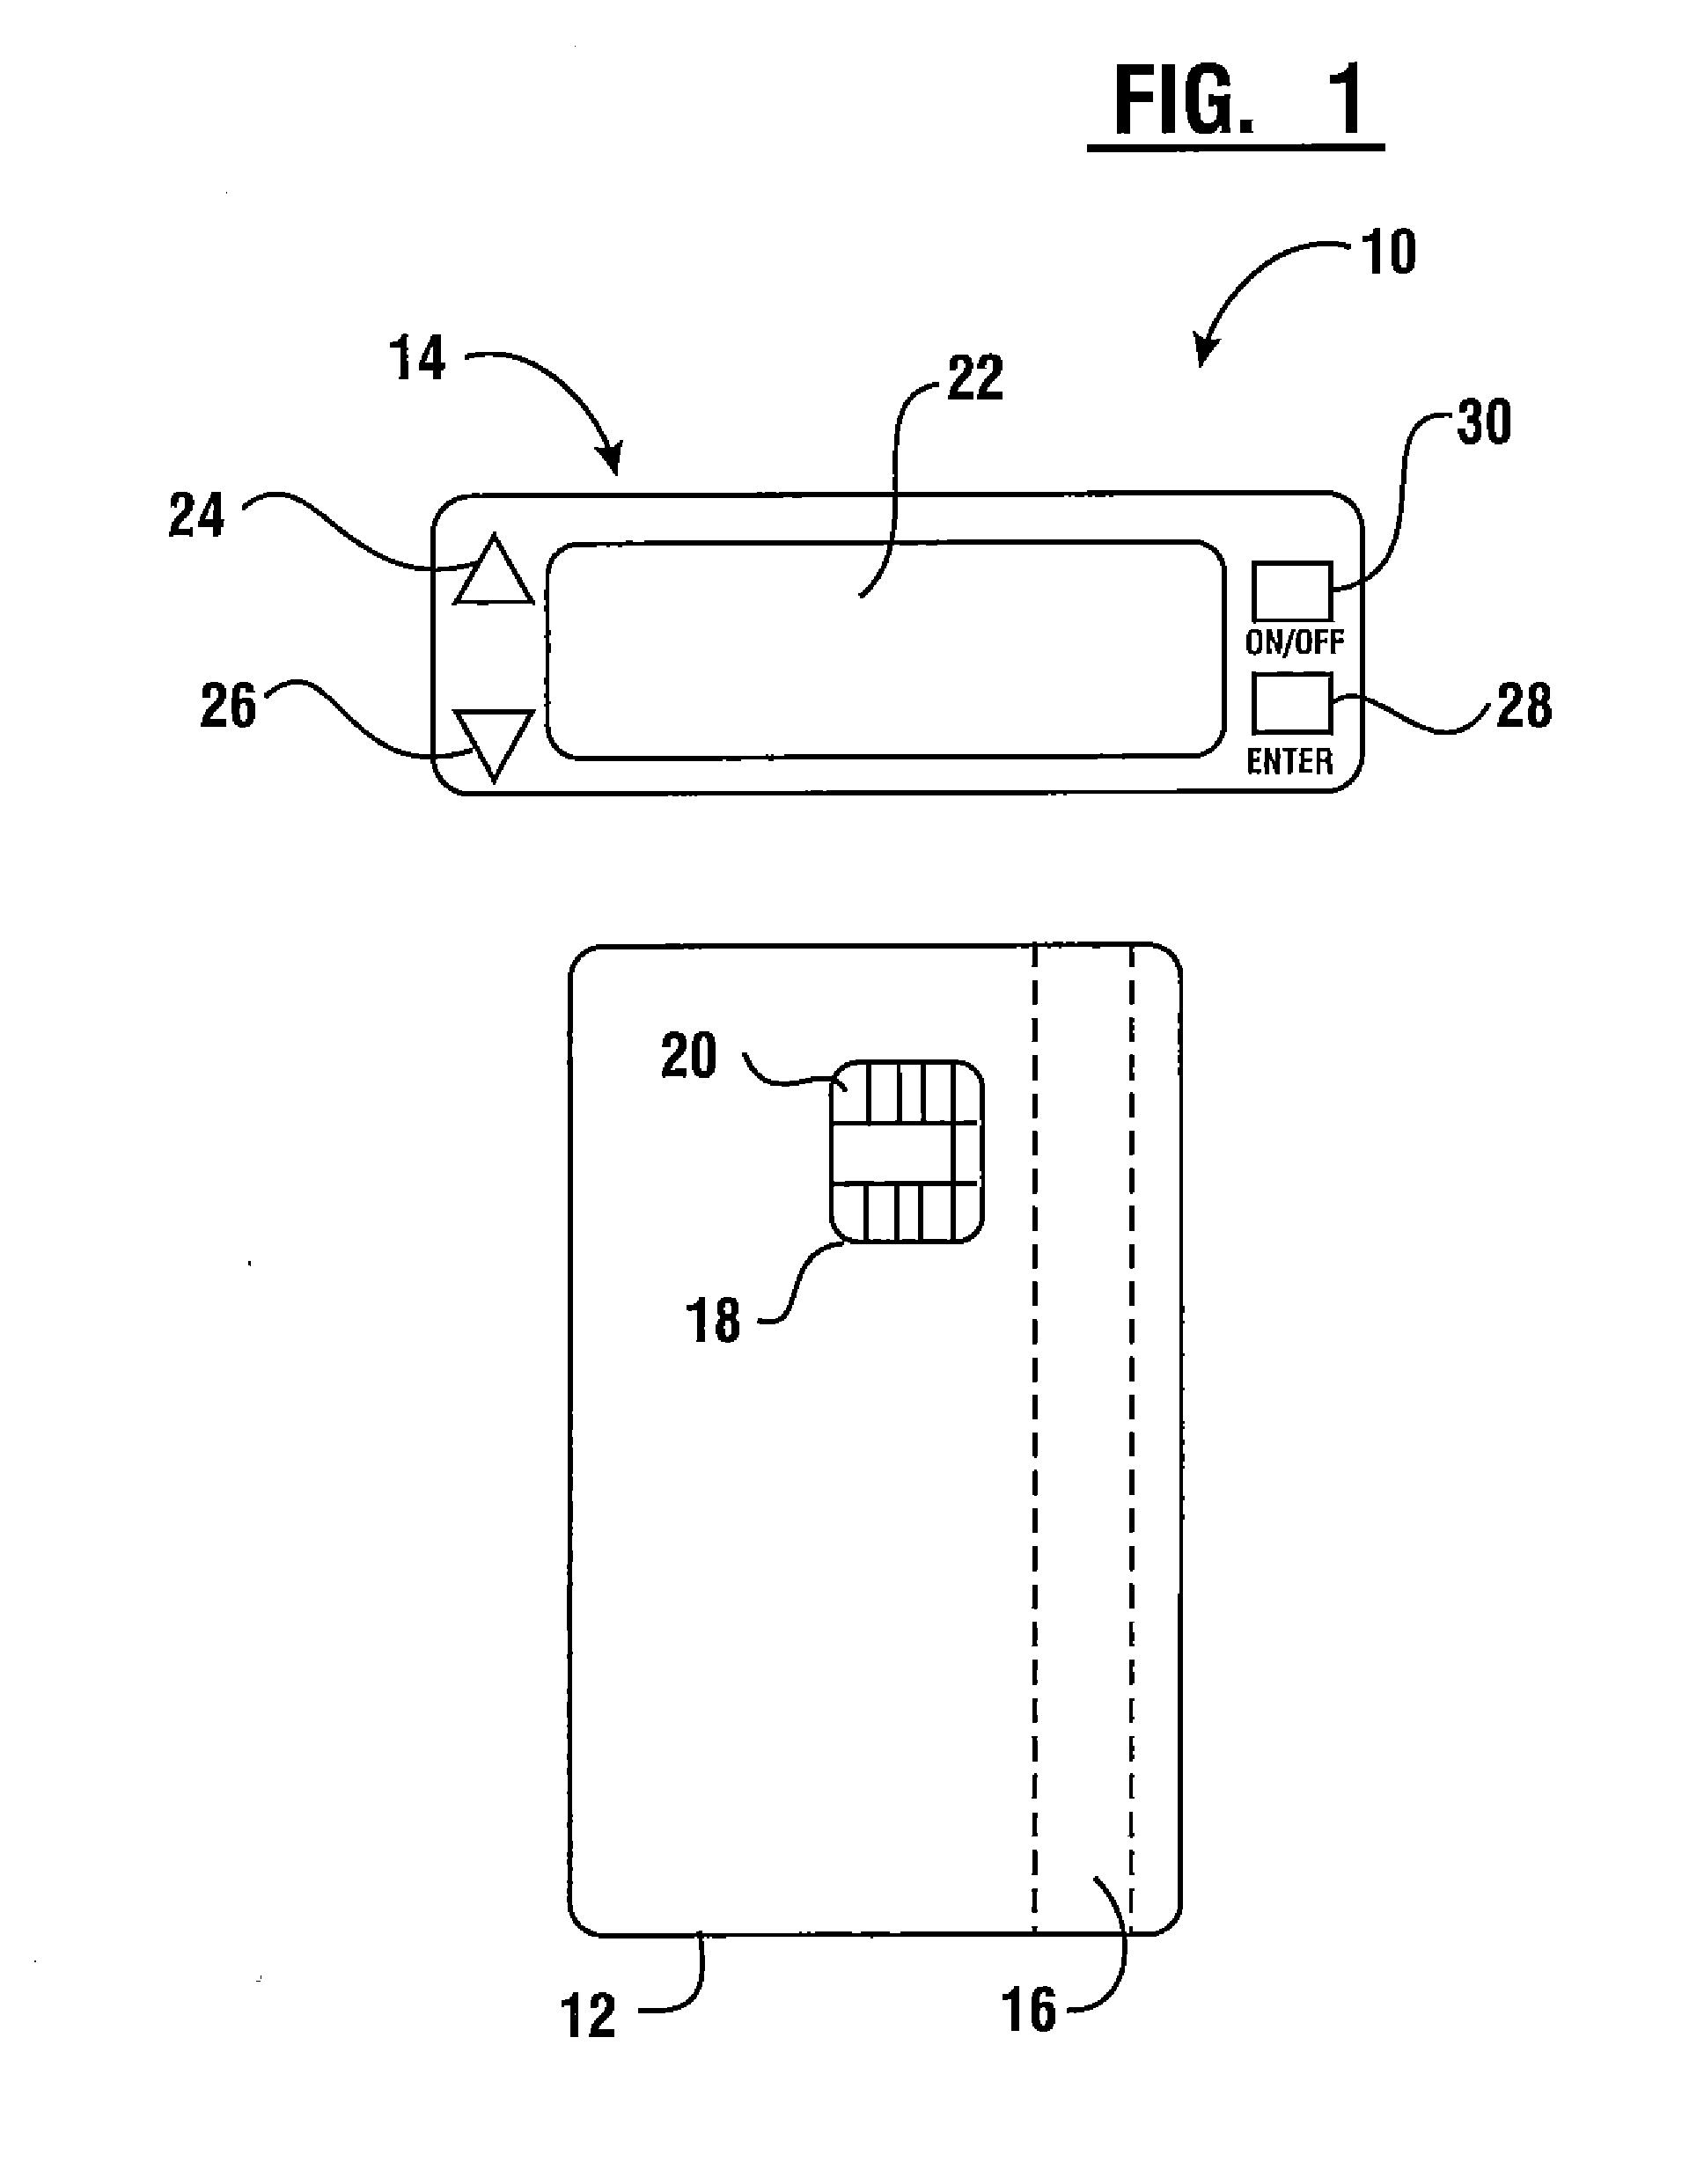 Banking Terminal that Operates to Cause Financial Transfers Responsive to Data Bearing Records